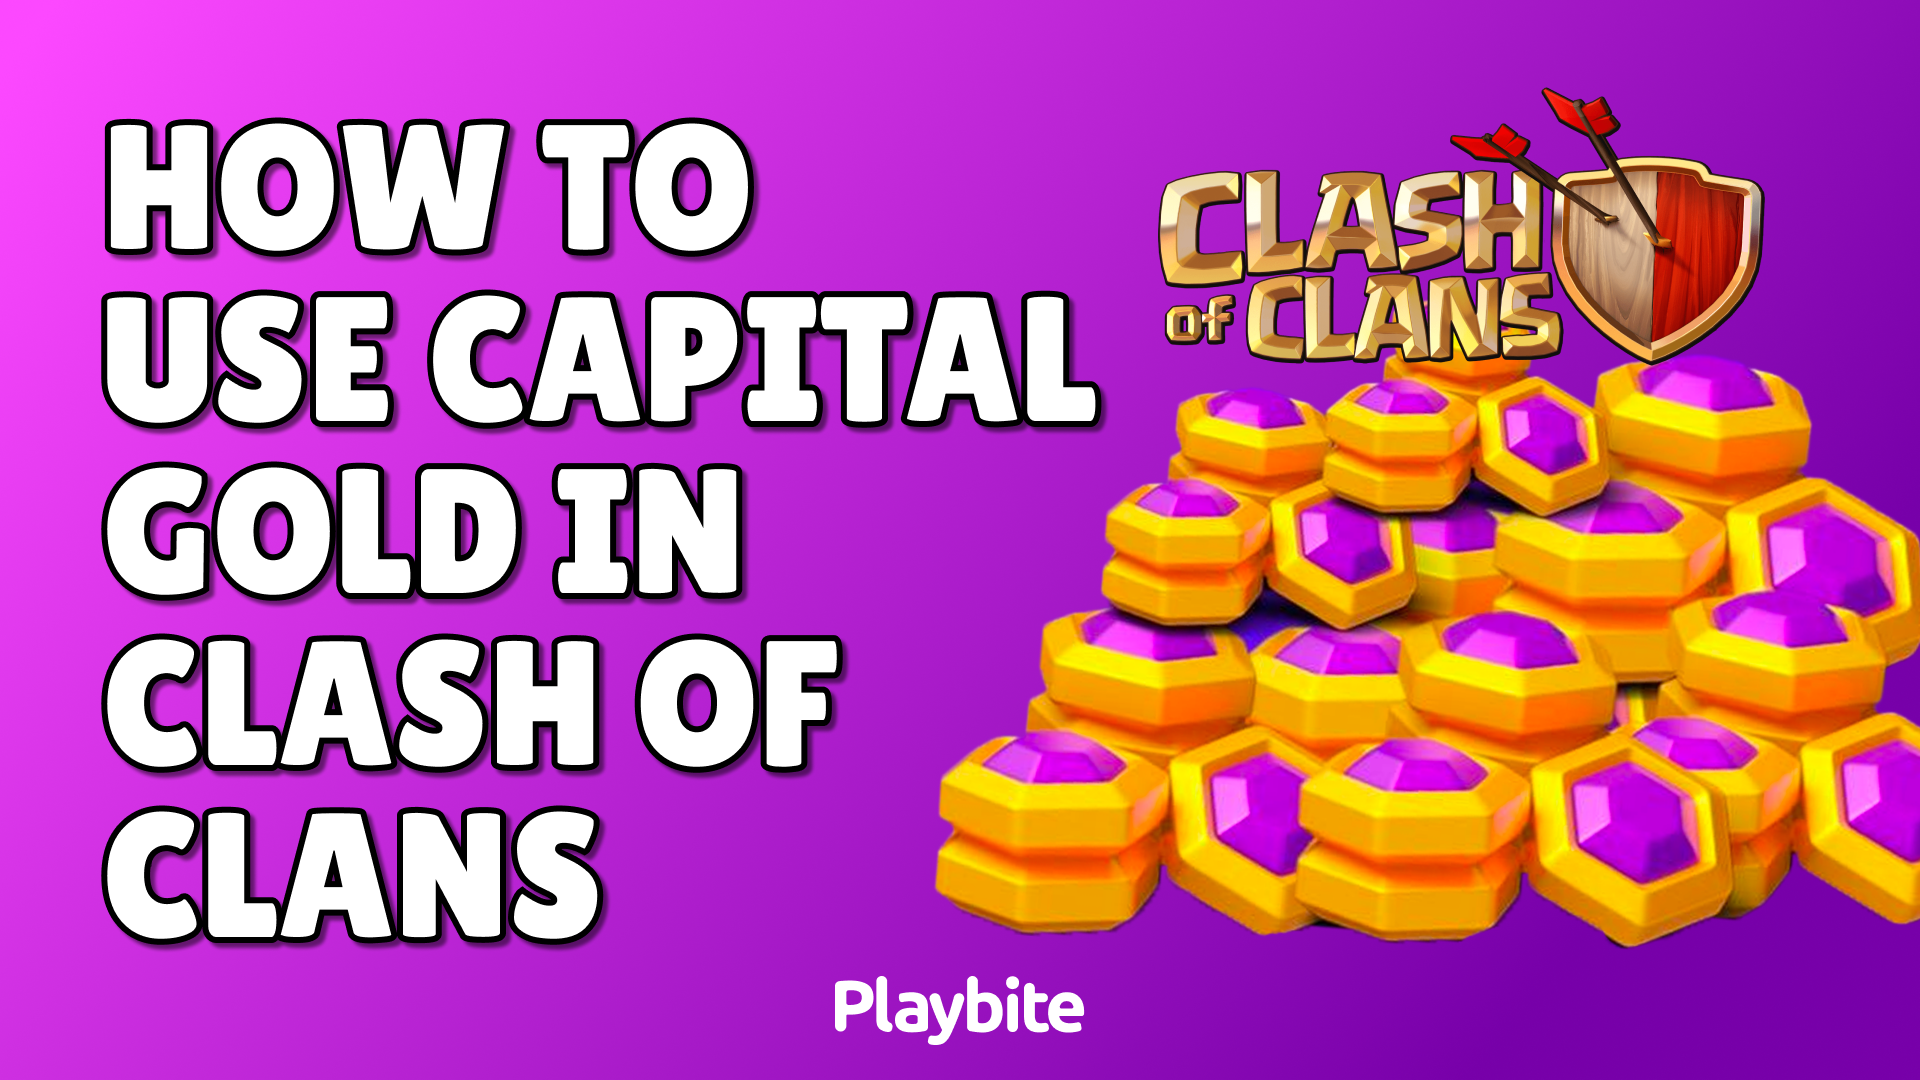 How To Use Capital Gold In Clash Of Clans